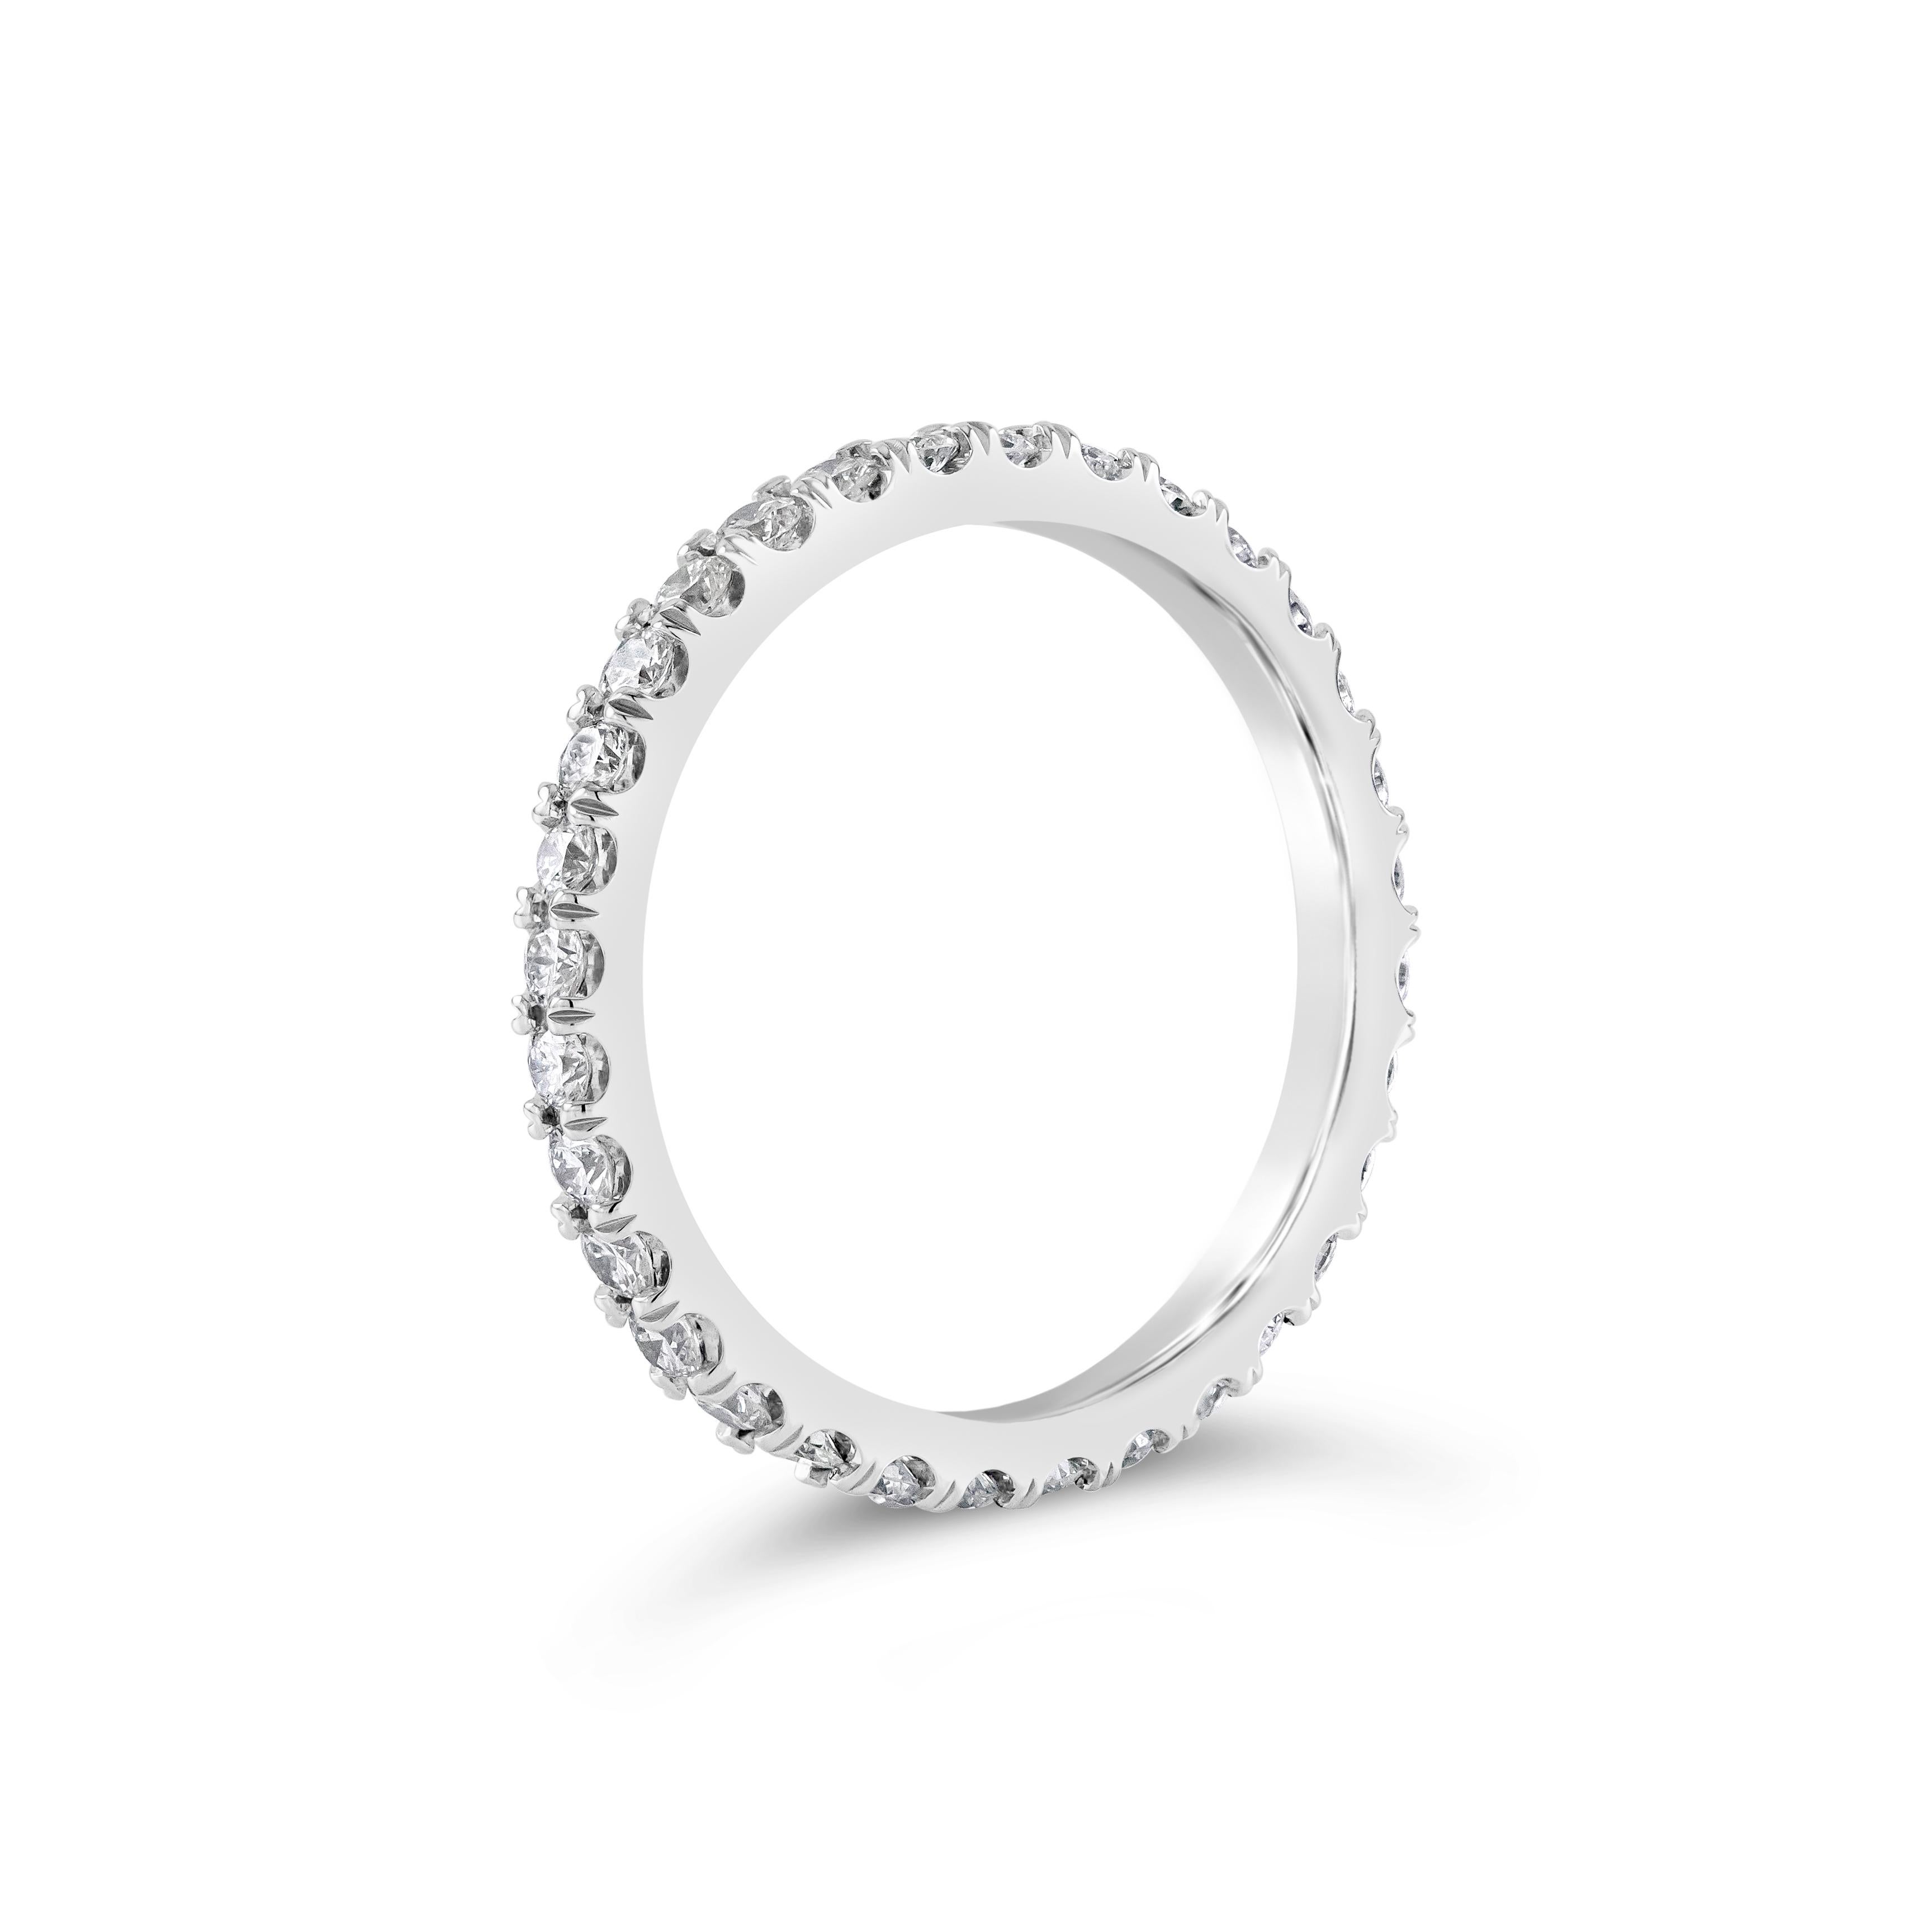 This simple eternity wedding ring features 0.67 total carats of 32 round brilliant diamonds in eternity setting. Made with Platinum. Size 6 US.

Roman Malakov is a custom house, specializing in creating anything you can imagine. If you would like to